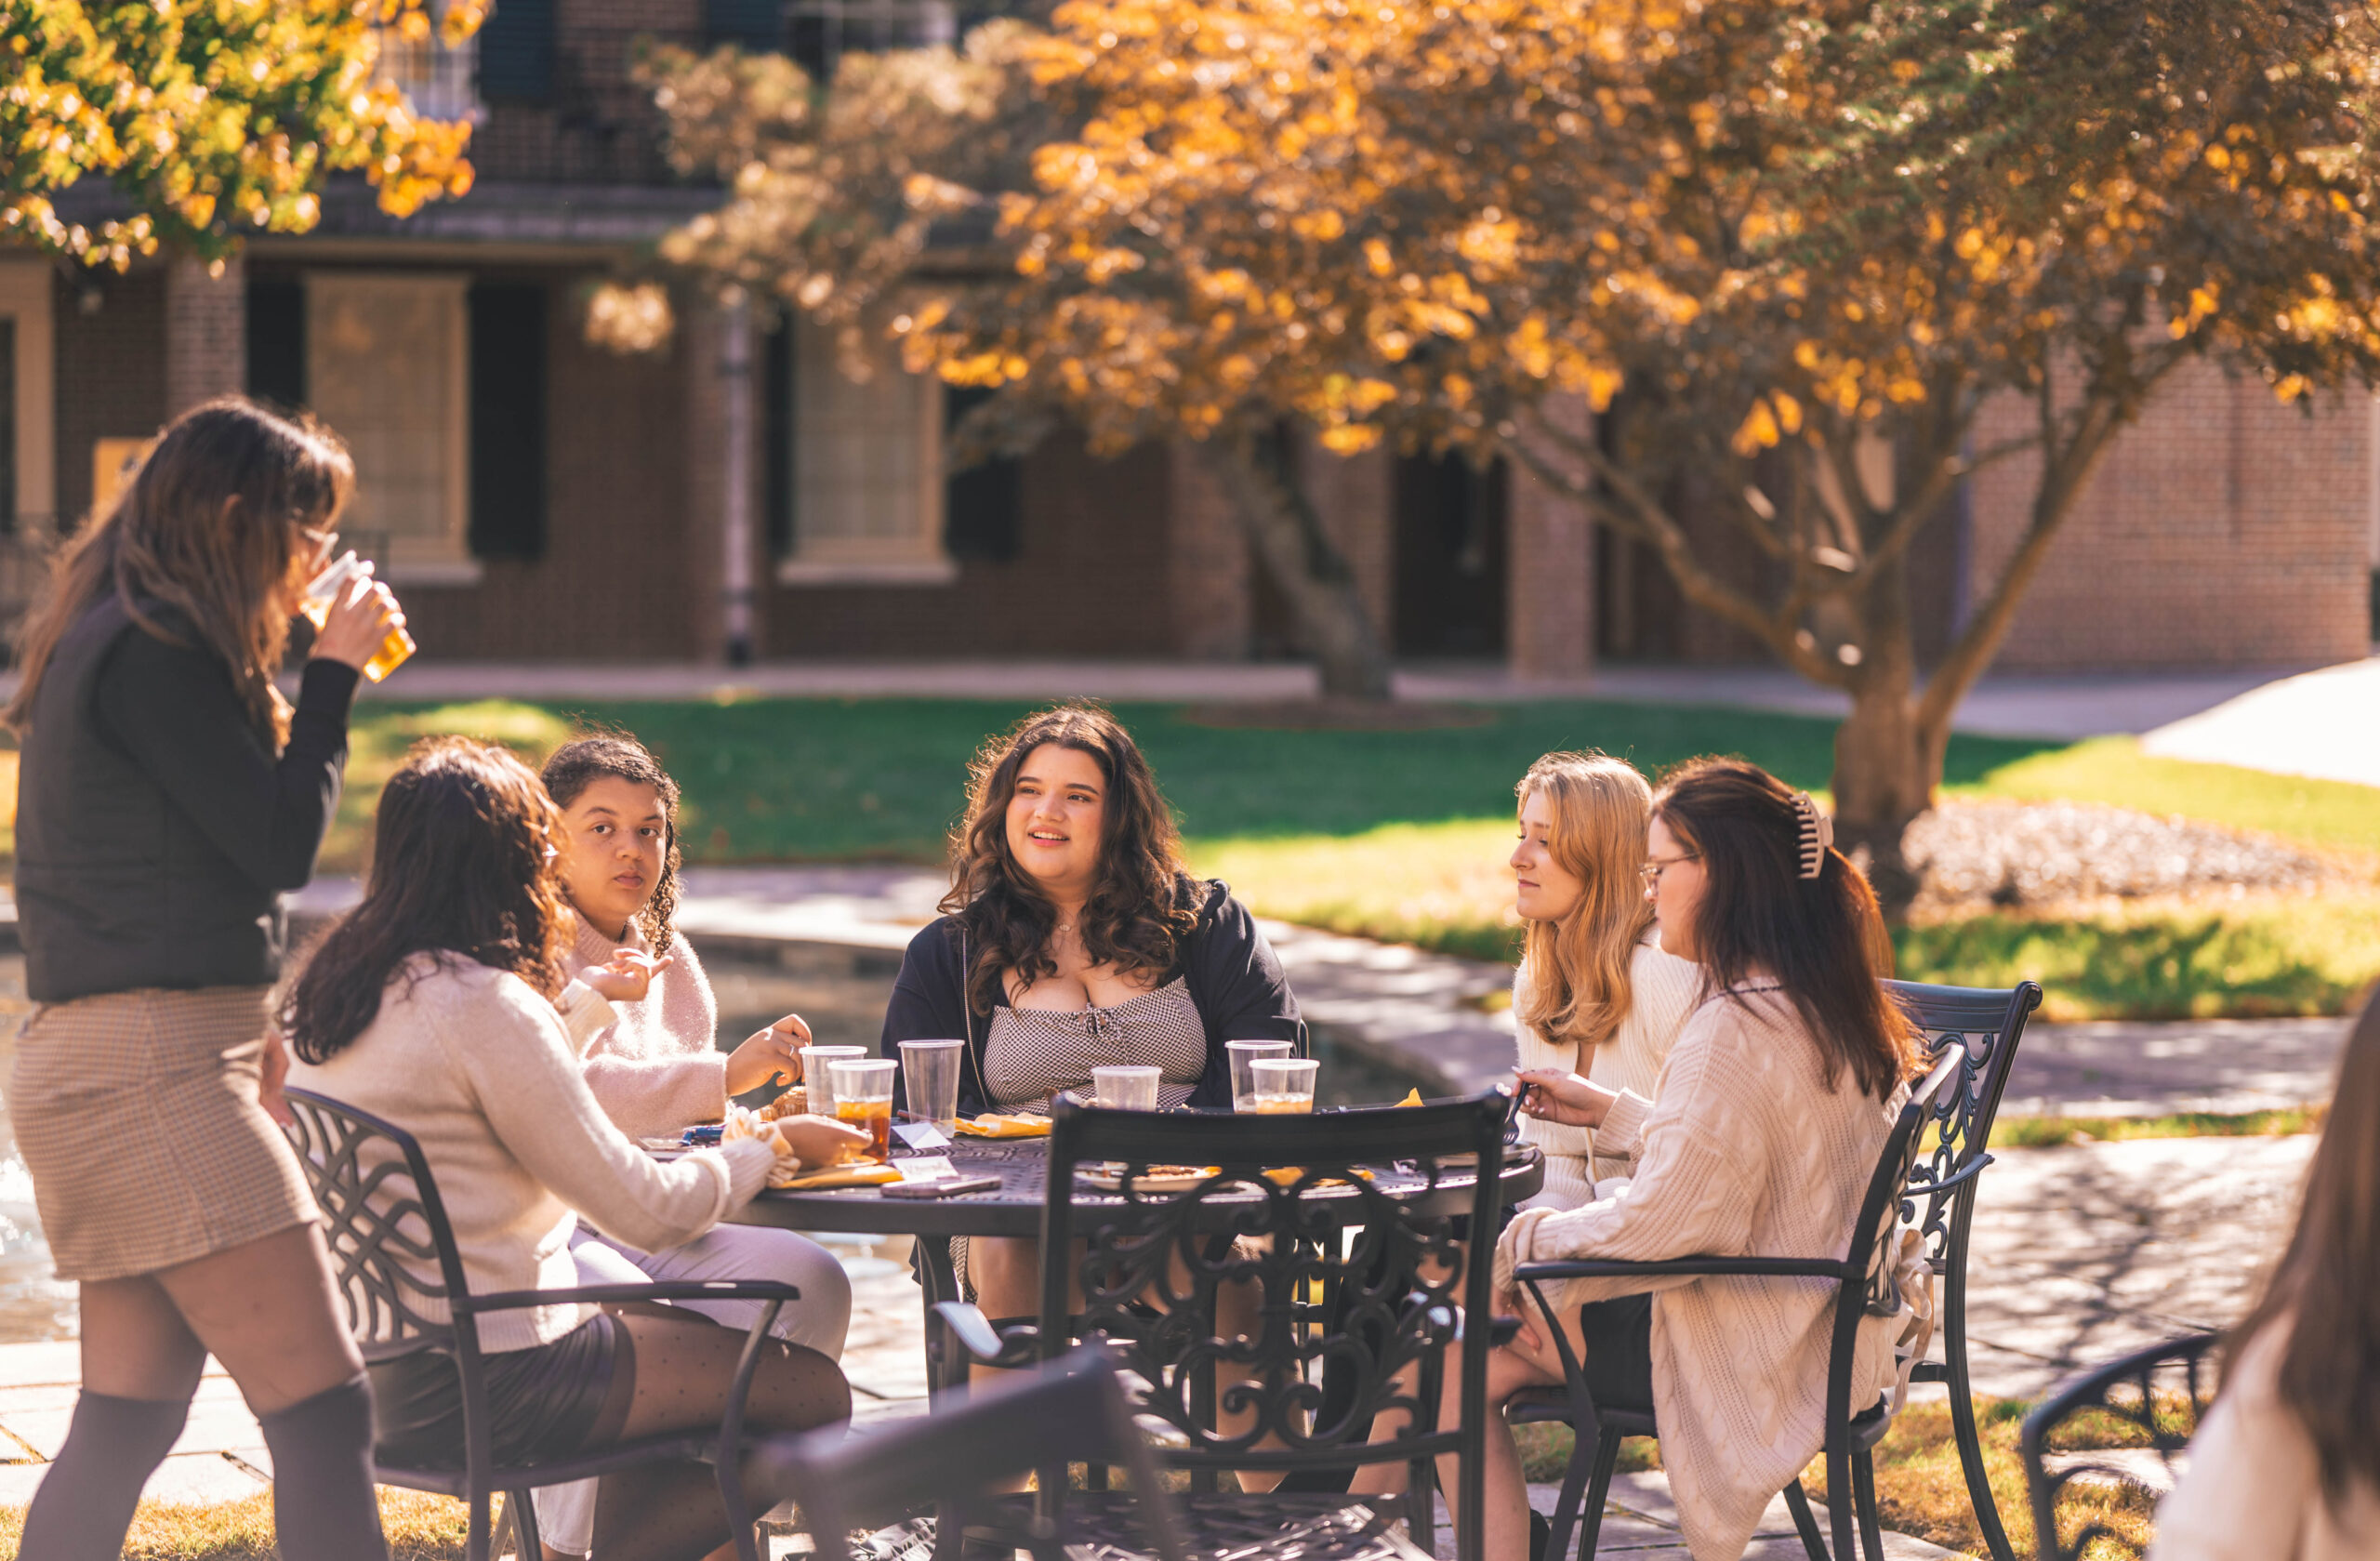 Group of young women eating at an outdoor table on a fall day.